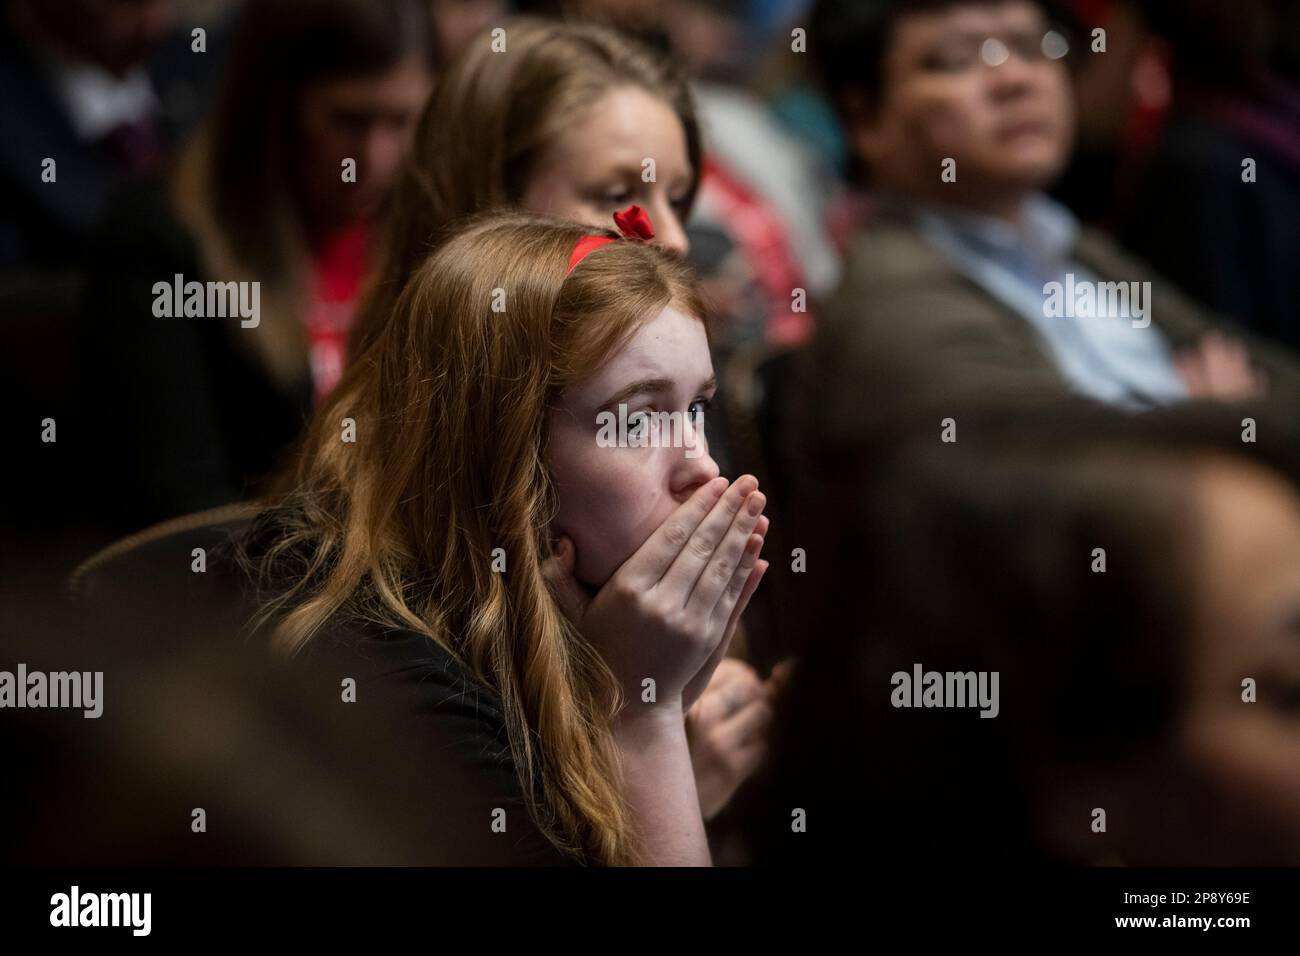 Mia Lynch, 17, of Pittsburgh sits in the audience during a Senate Committee on Environment and Public Works hearing to examine protecting public health and the environment in the wake of the Norfolk Southern train derailment and chemical release in East Palestine, Ohio, in the Dirksen Senate Office Building in Washington, DC, Thursday, March 9, 2023. Credit: Rod Lamkey/CNP /MediaPunch Stock Photo